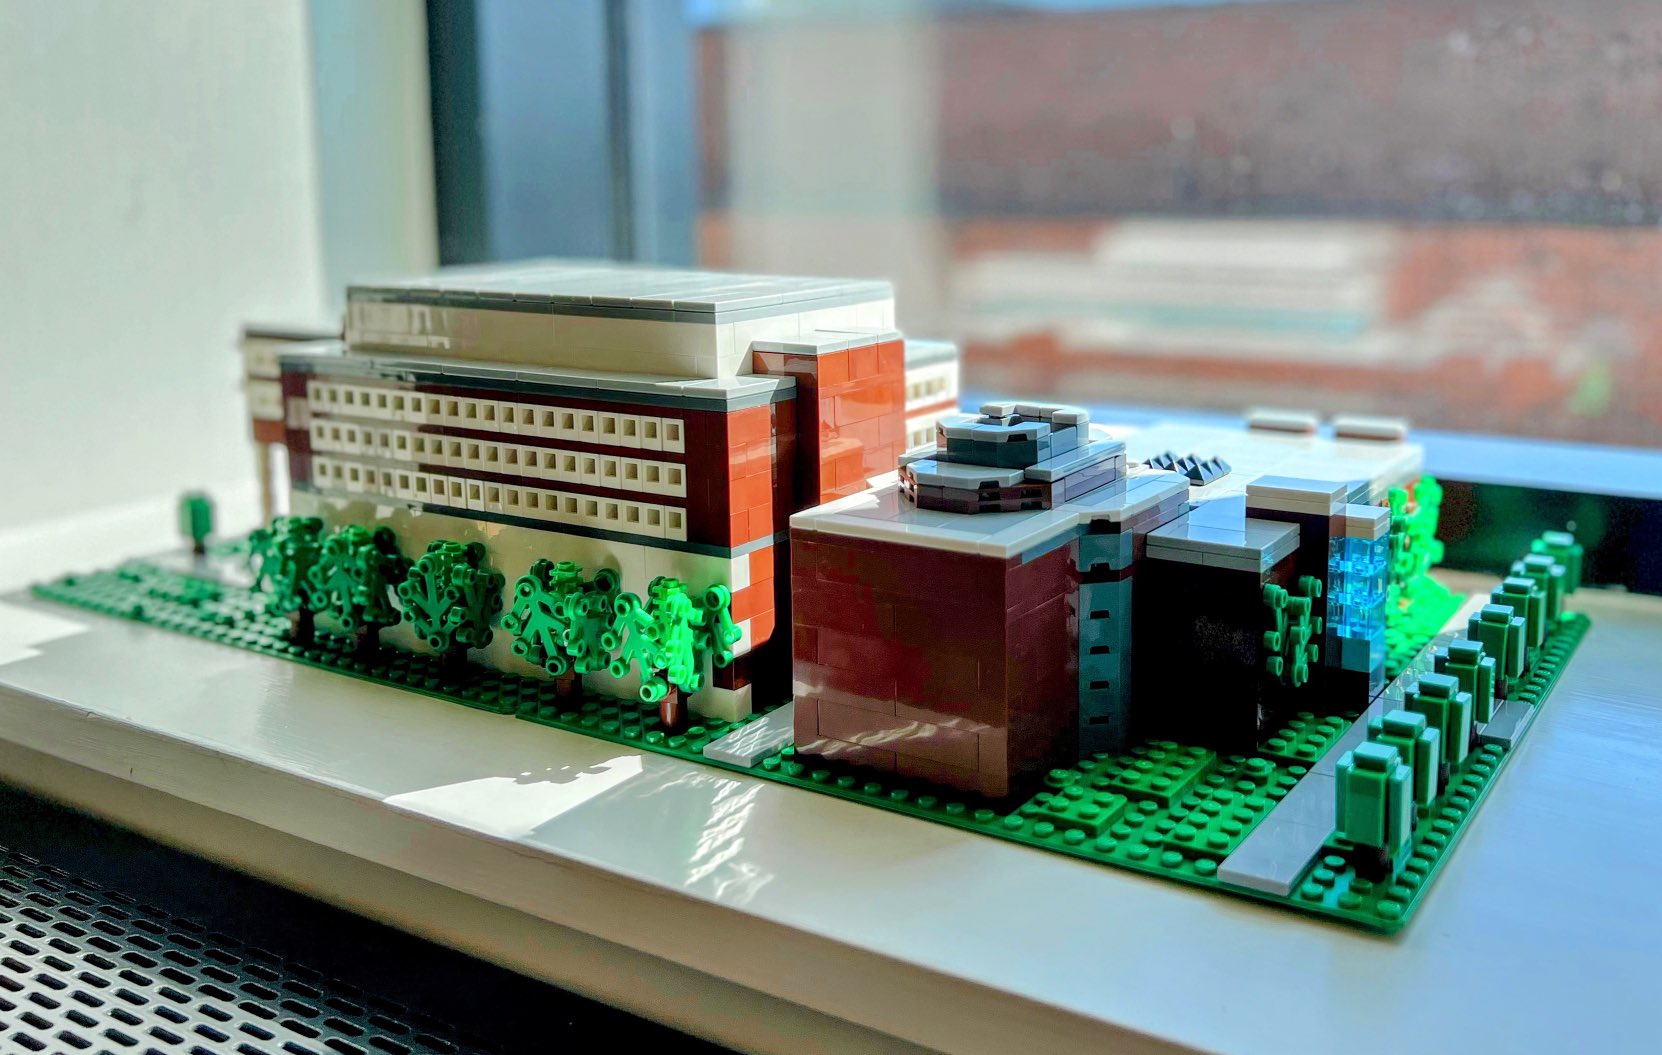 Osgoode building made out of Lego